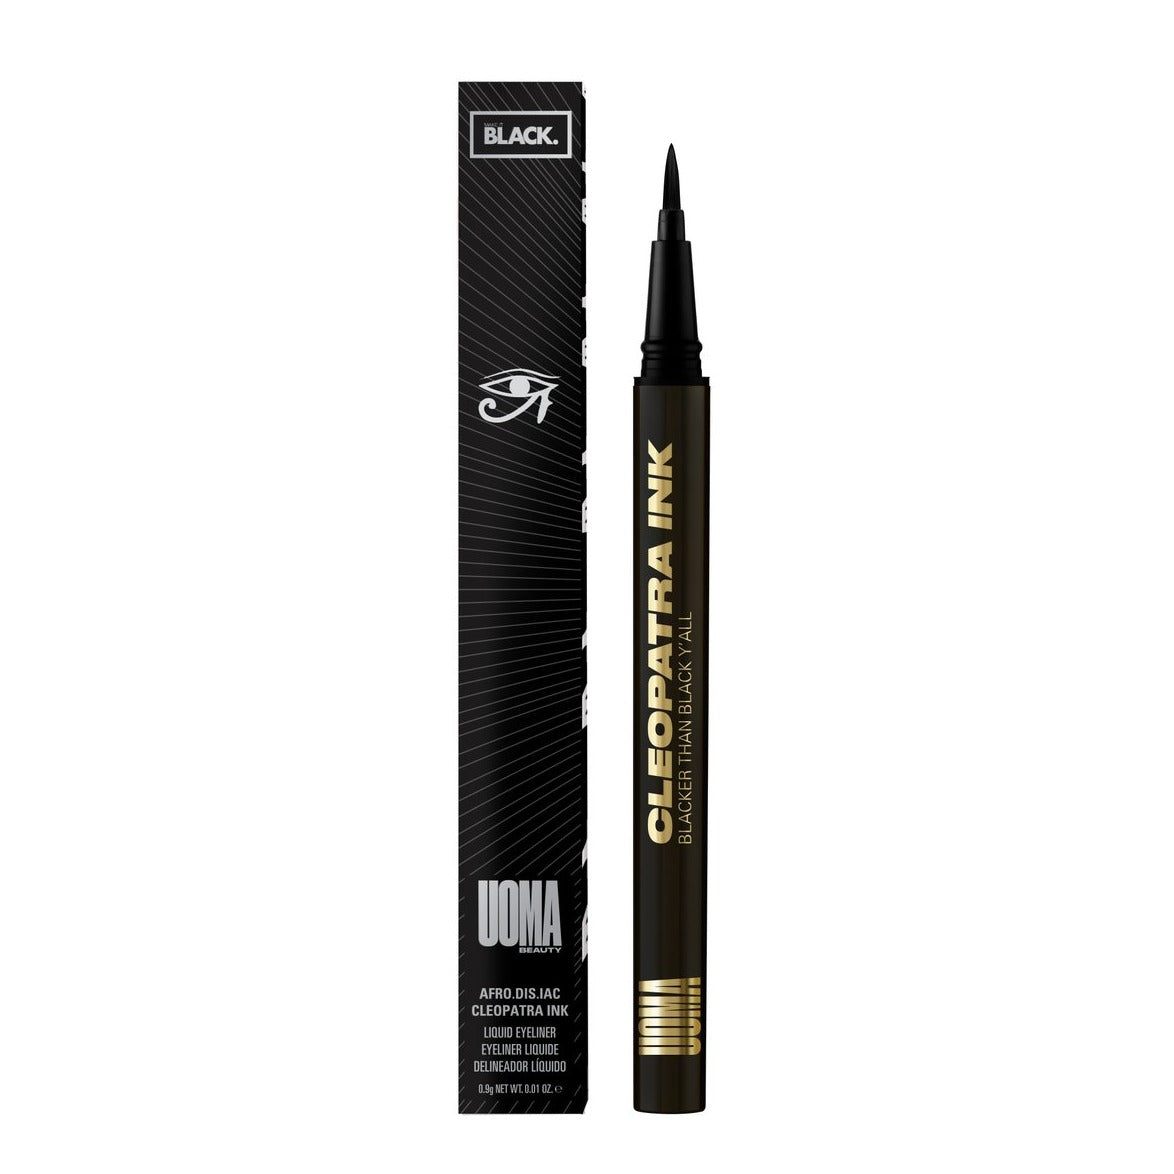 Strikingly intense, long lasting, water-resistant liquid eyeliner Ultra fine felt tip design delivers an even deeper jet black formula that applies with smooth precision to create the most intense eye looks